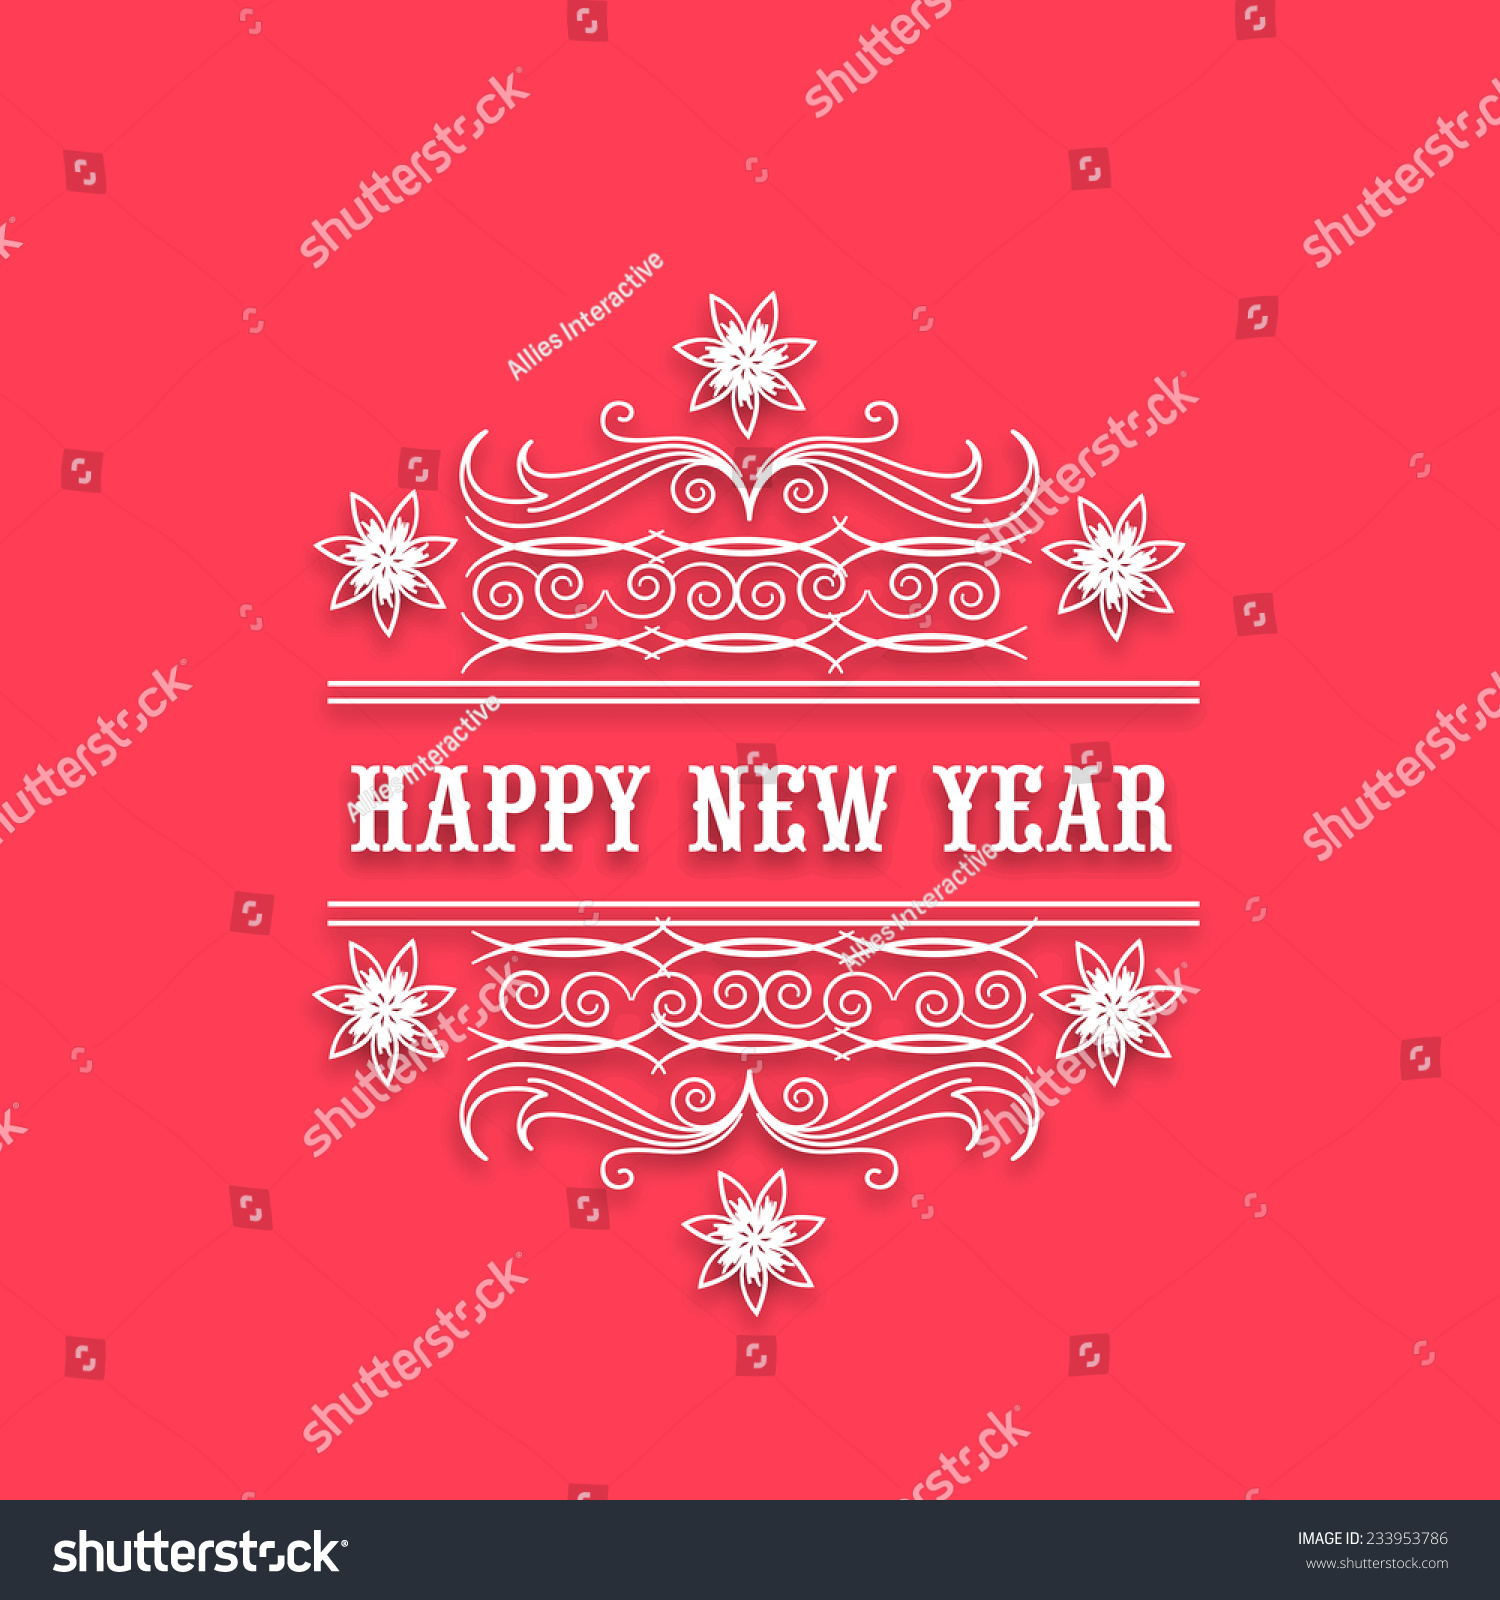 Happy New Year 2015 Celebration Party Poster Decorated With Floral